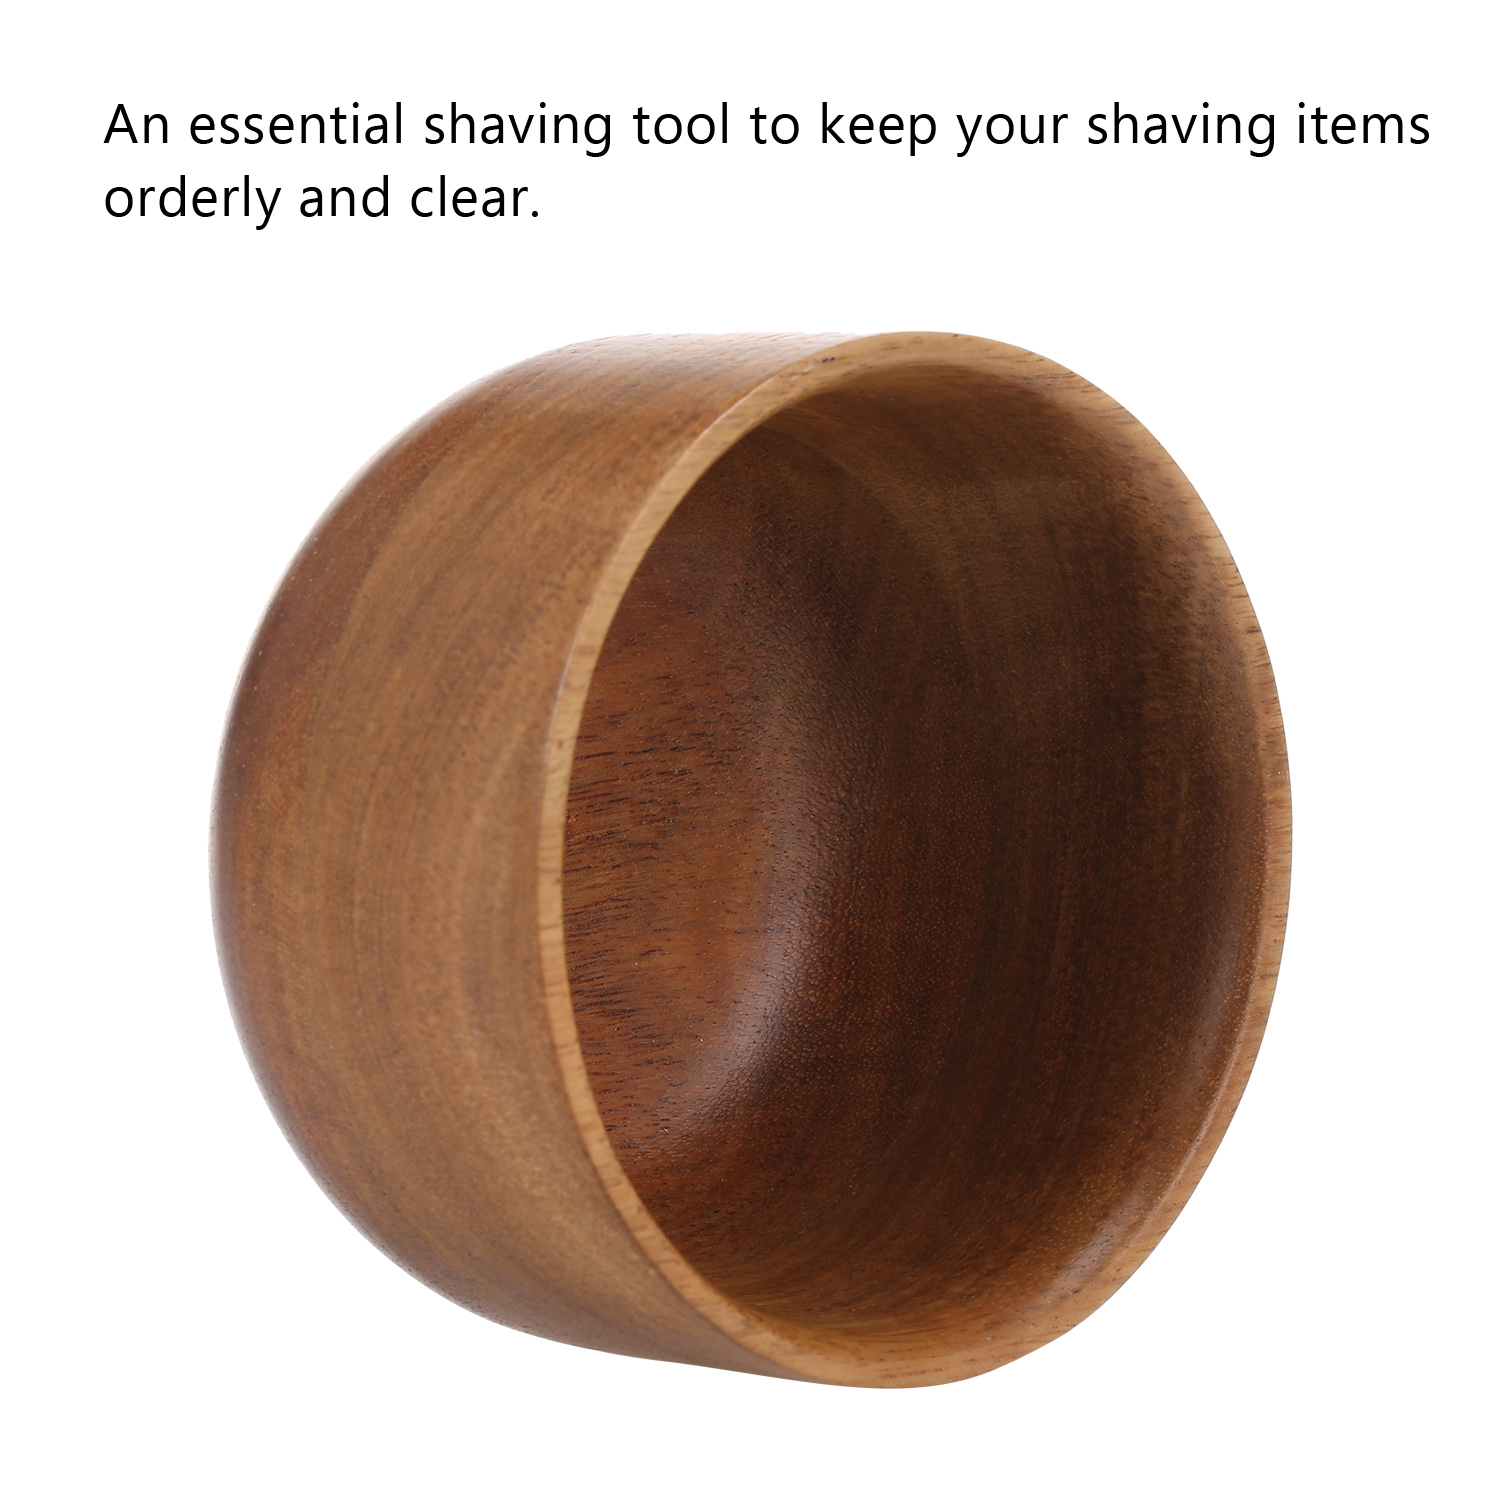 Male Shaving Bowl Wooden Shaving Brush Bowl High Quality Shaving Mug Shave Cream Soap Cup Portable Male Face Cleaning Soap Bowl